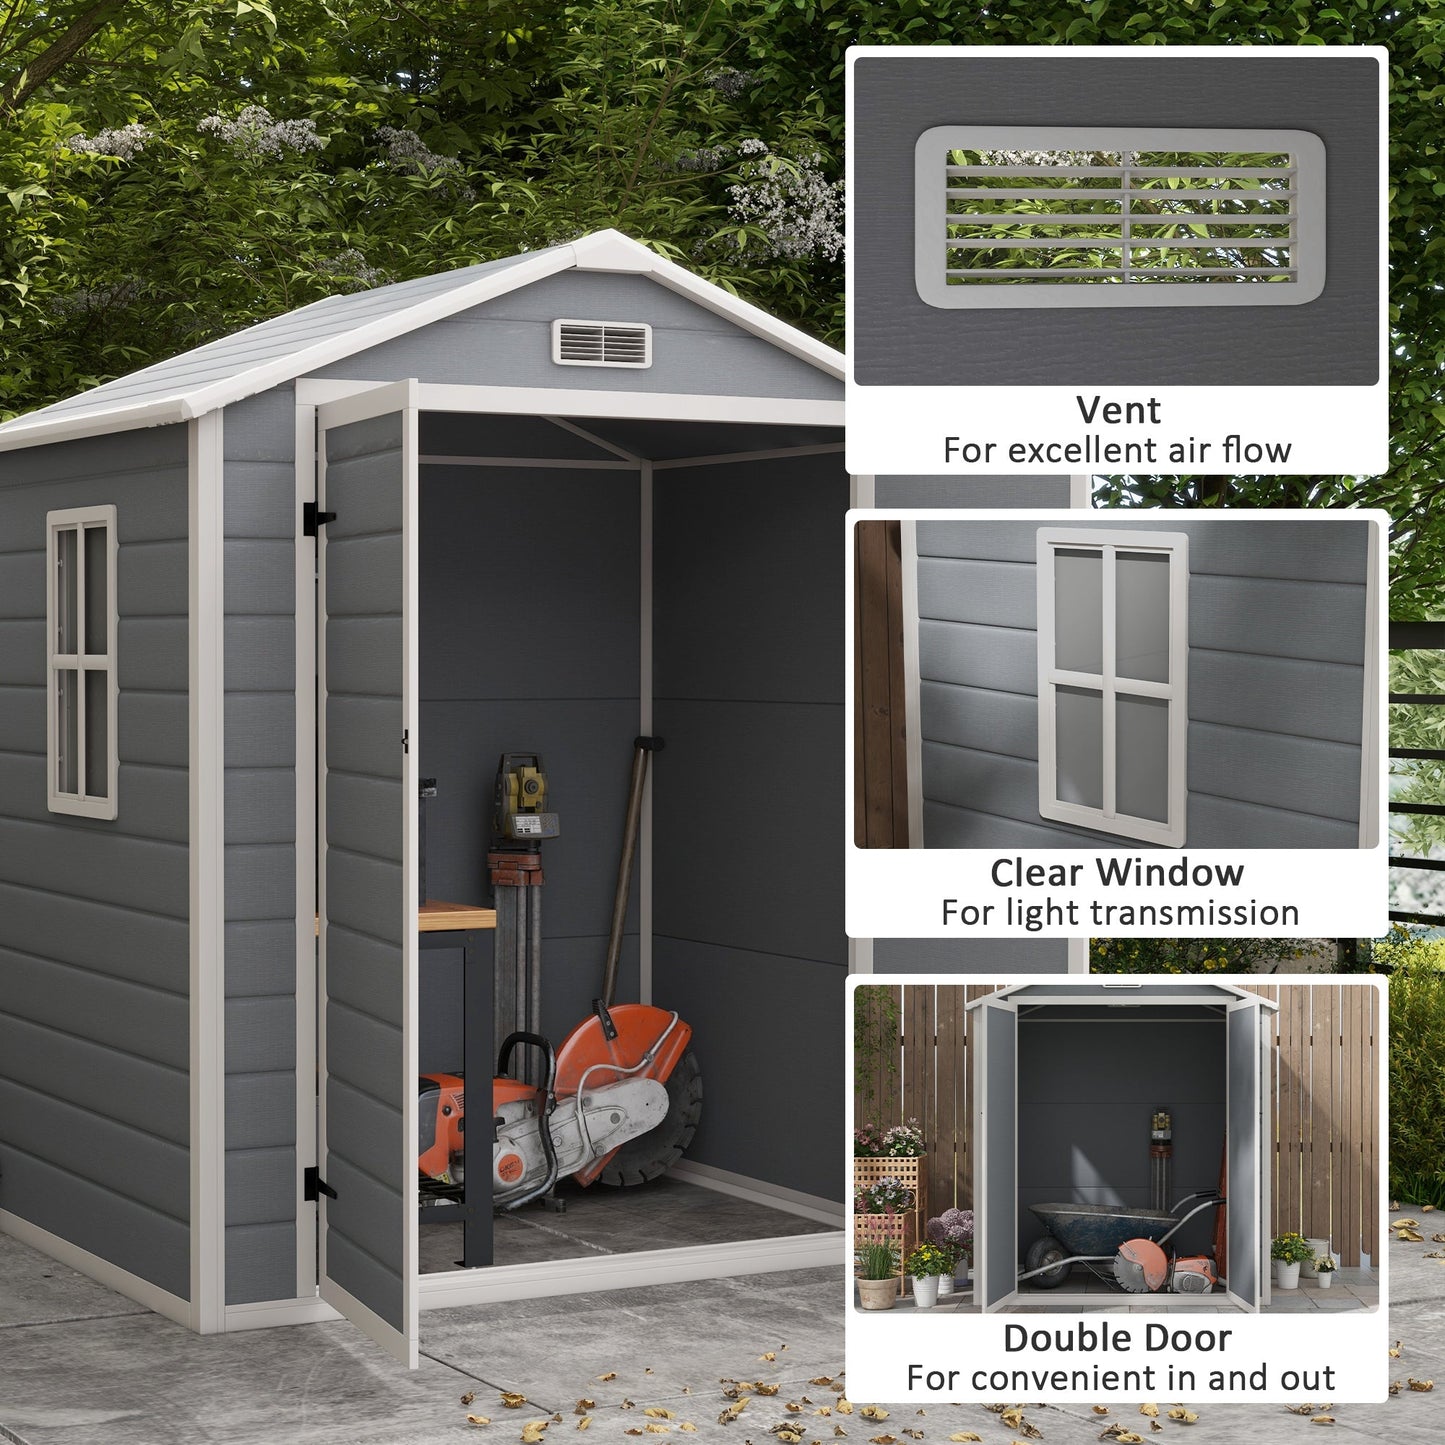 -Outsunny Garden Shed, 6'x4.5'Outdoor Storage Shed with Lockable Doors, Vent, Plastic Utility Tool Shed for Backyard, Patio, Gray - Outdoor Style Company